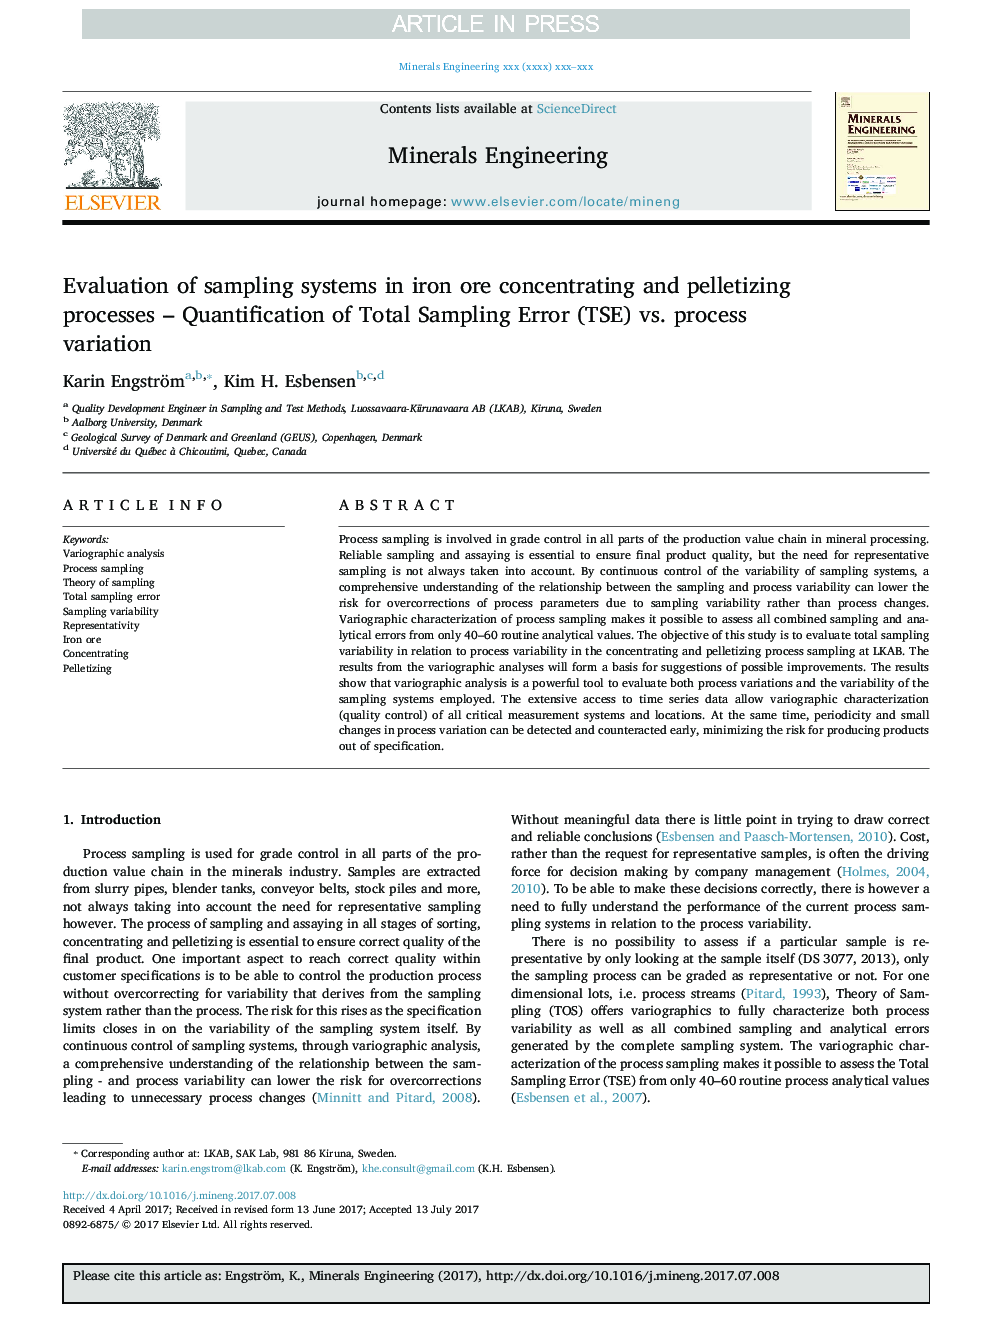 Evaluation of sampling systems in iron ore concentrating and pelletizing processes - Quantification of Total Sampling Error (TSE) vs. process variation